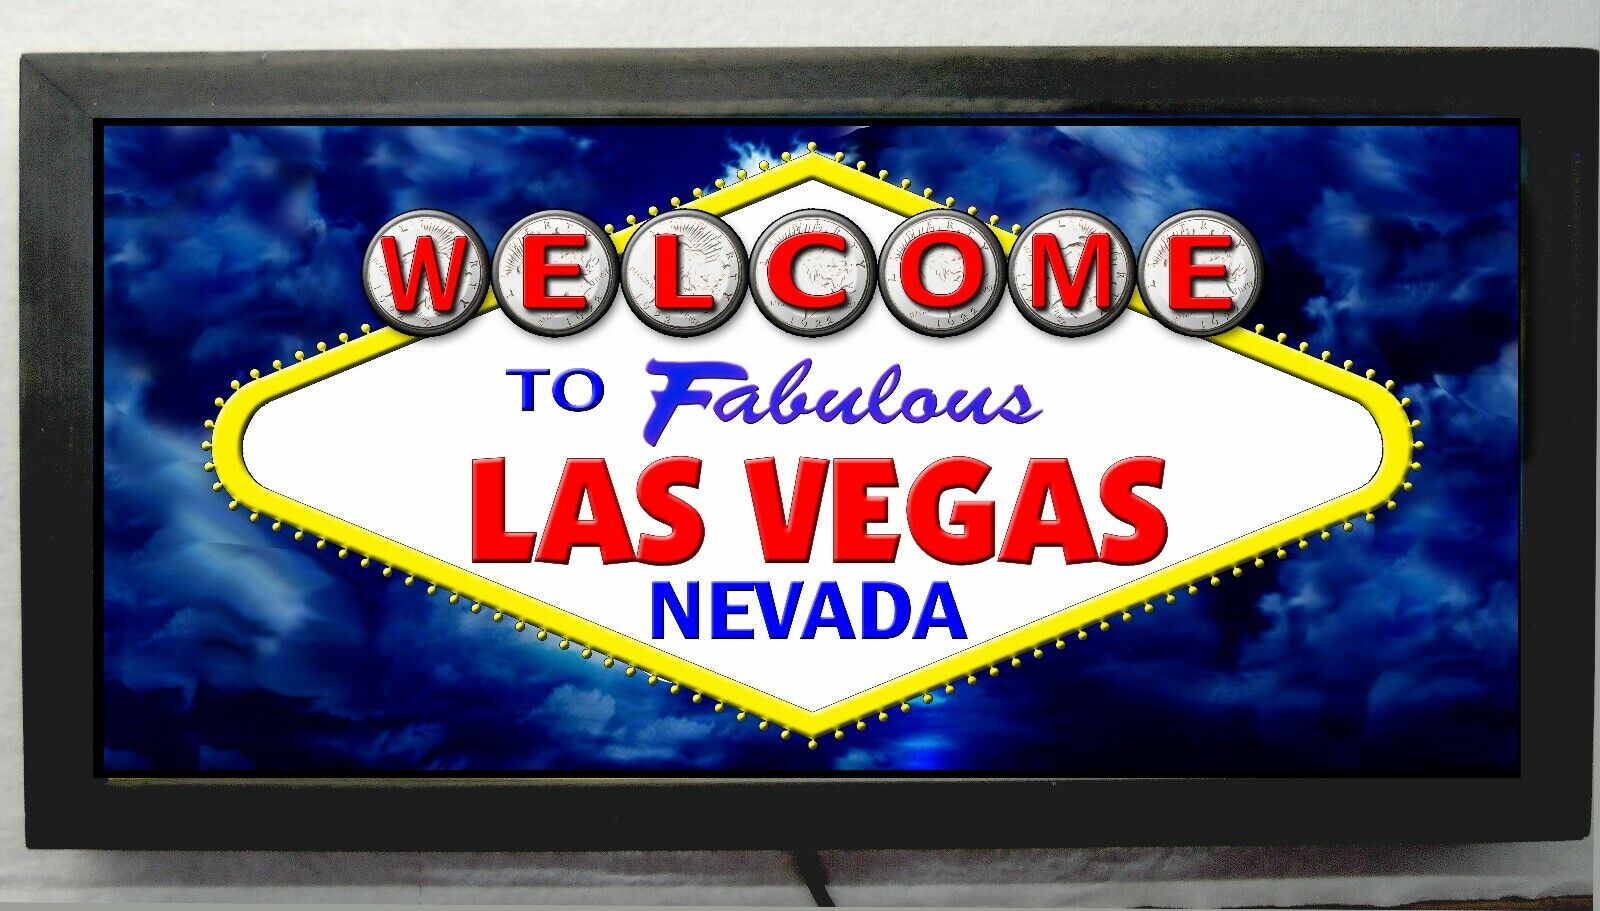 New LED LIGHTED WELCOME TO FABULOUS LAS VEGAS SIGN CASINO SIGN SLOTS SIGN 